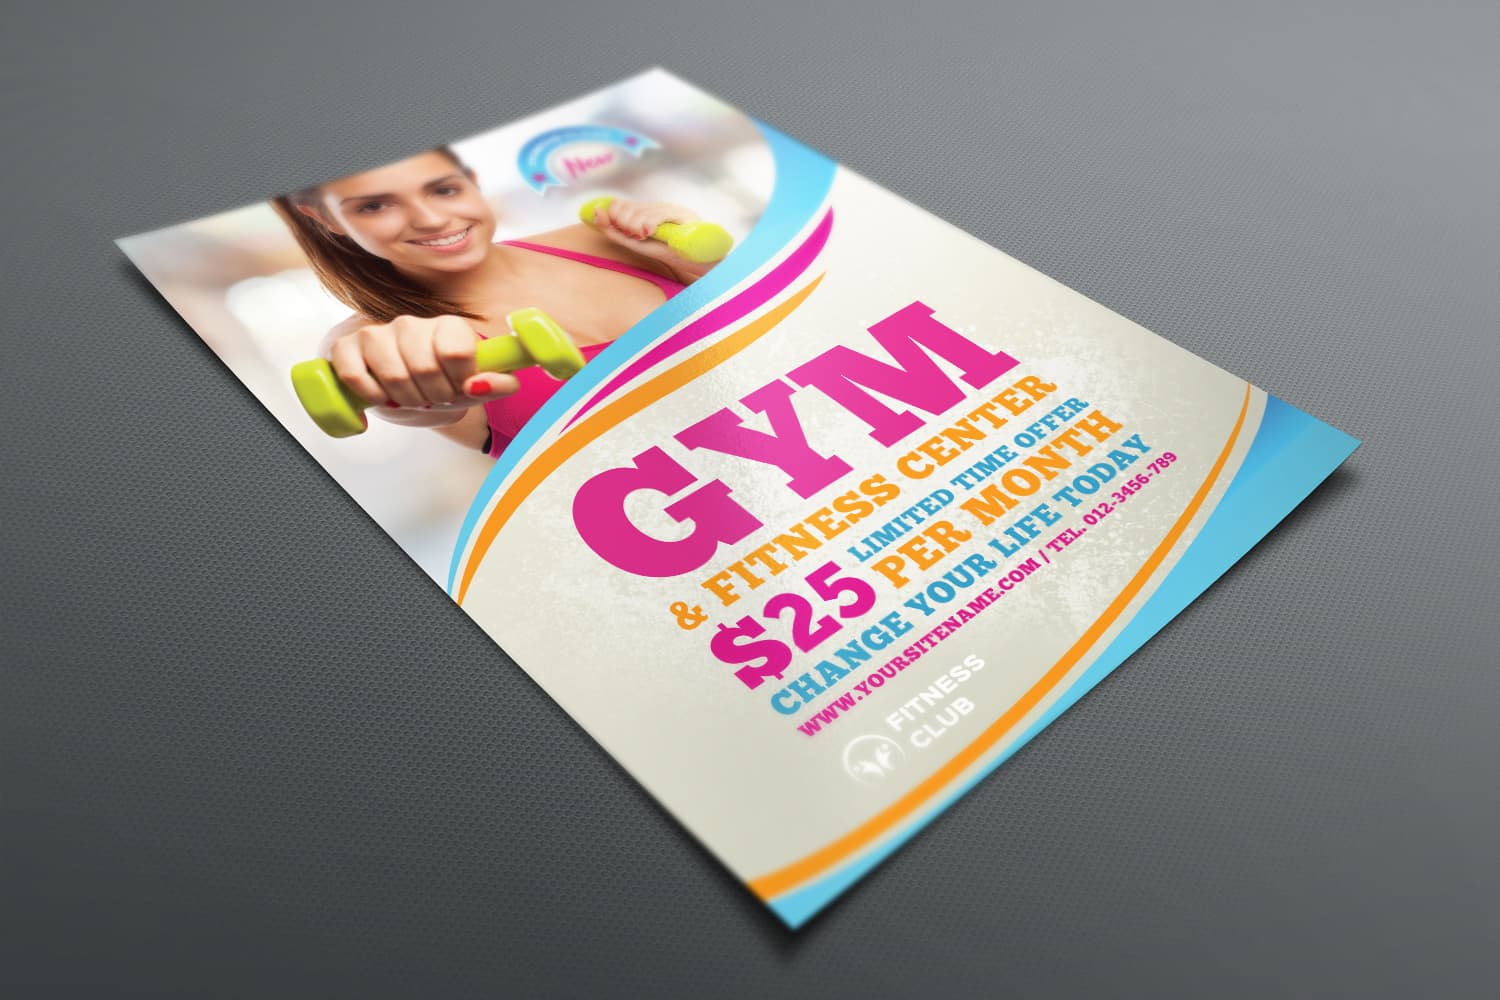 Fitness - Gym Flyer Template